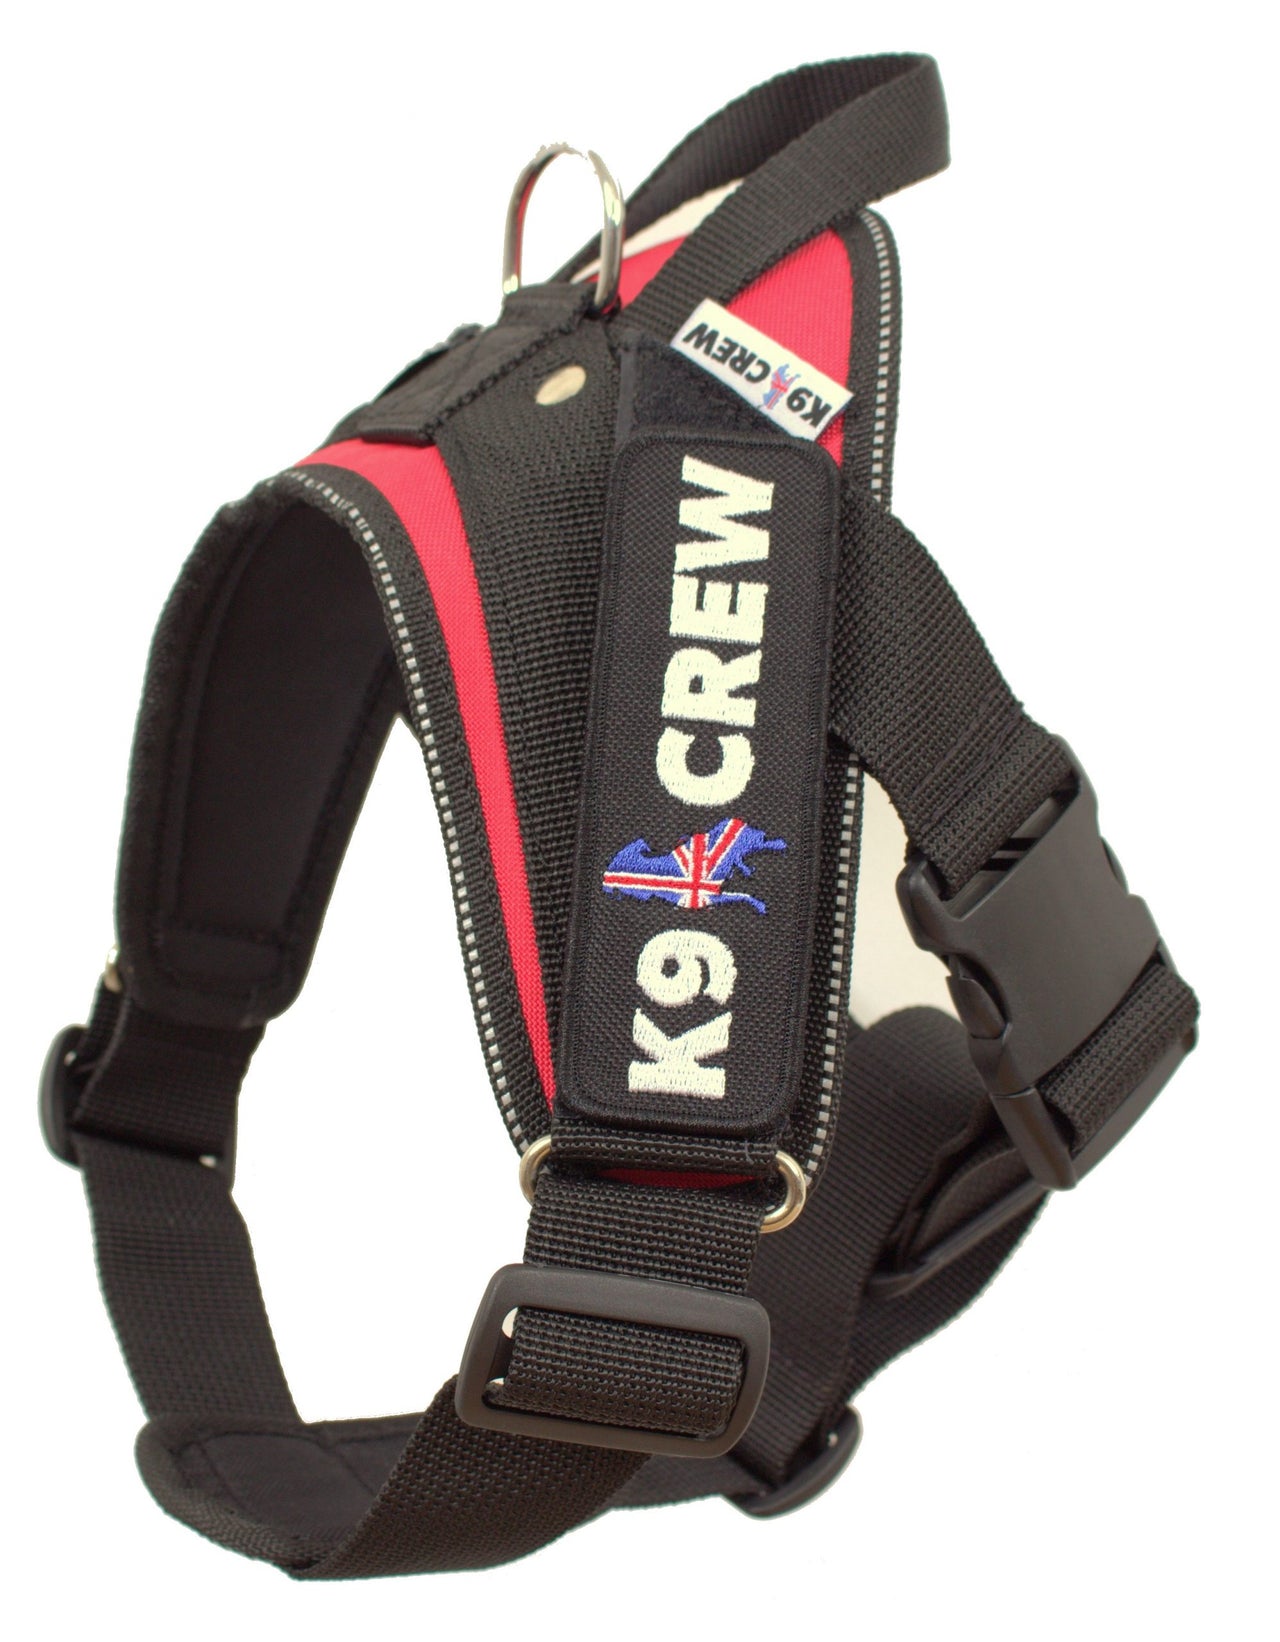 K9 CREW Red Harness